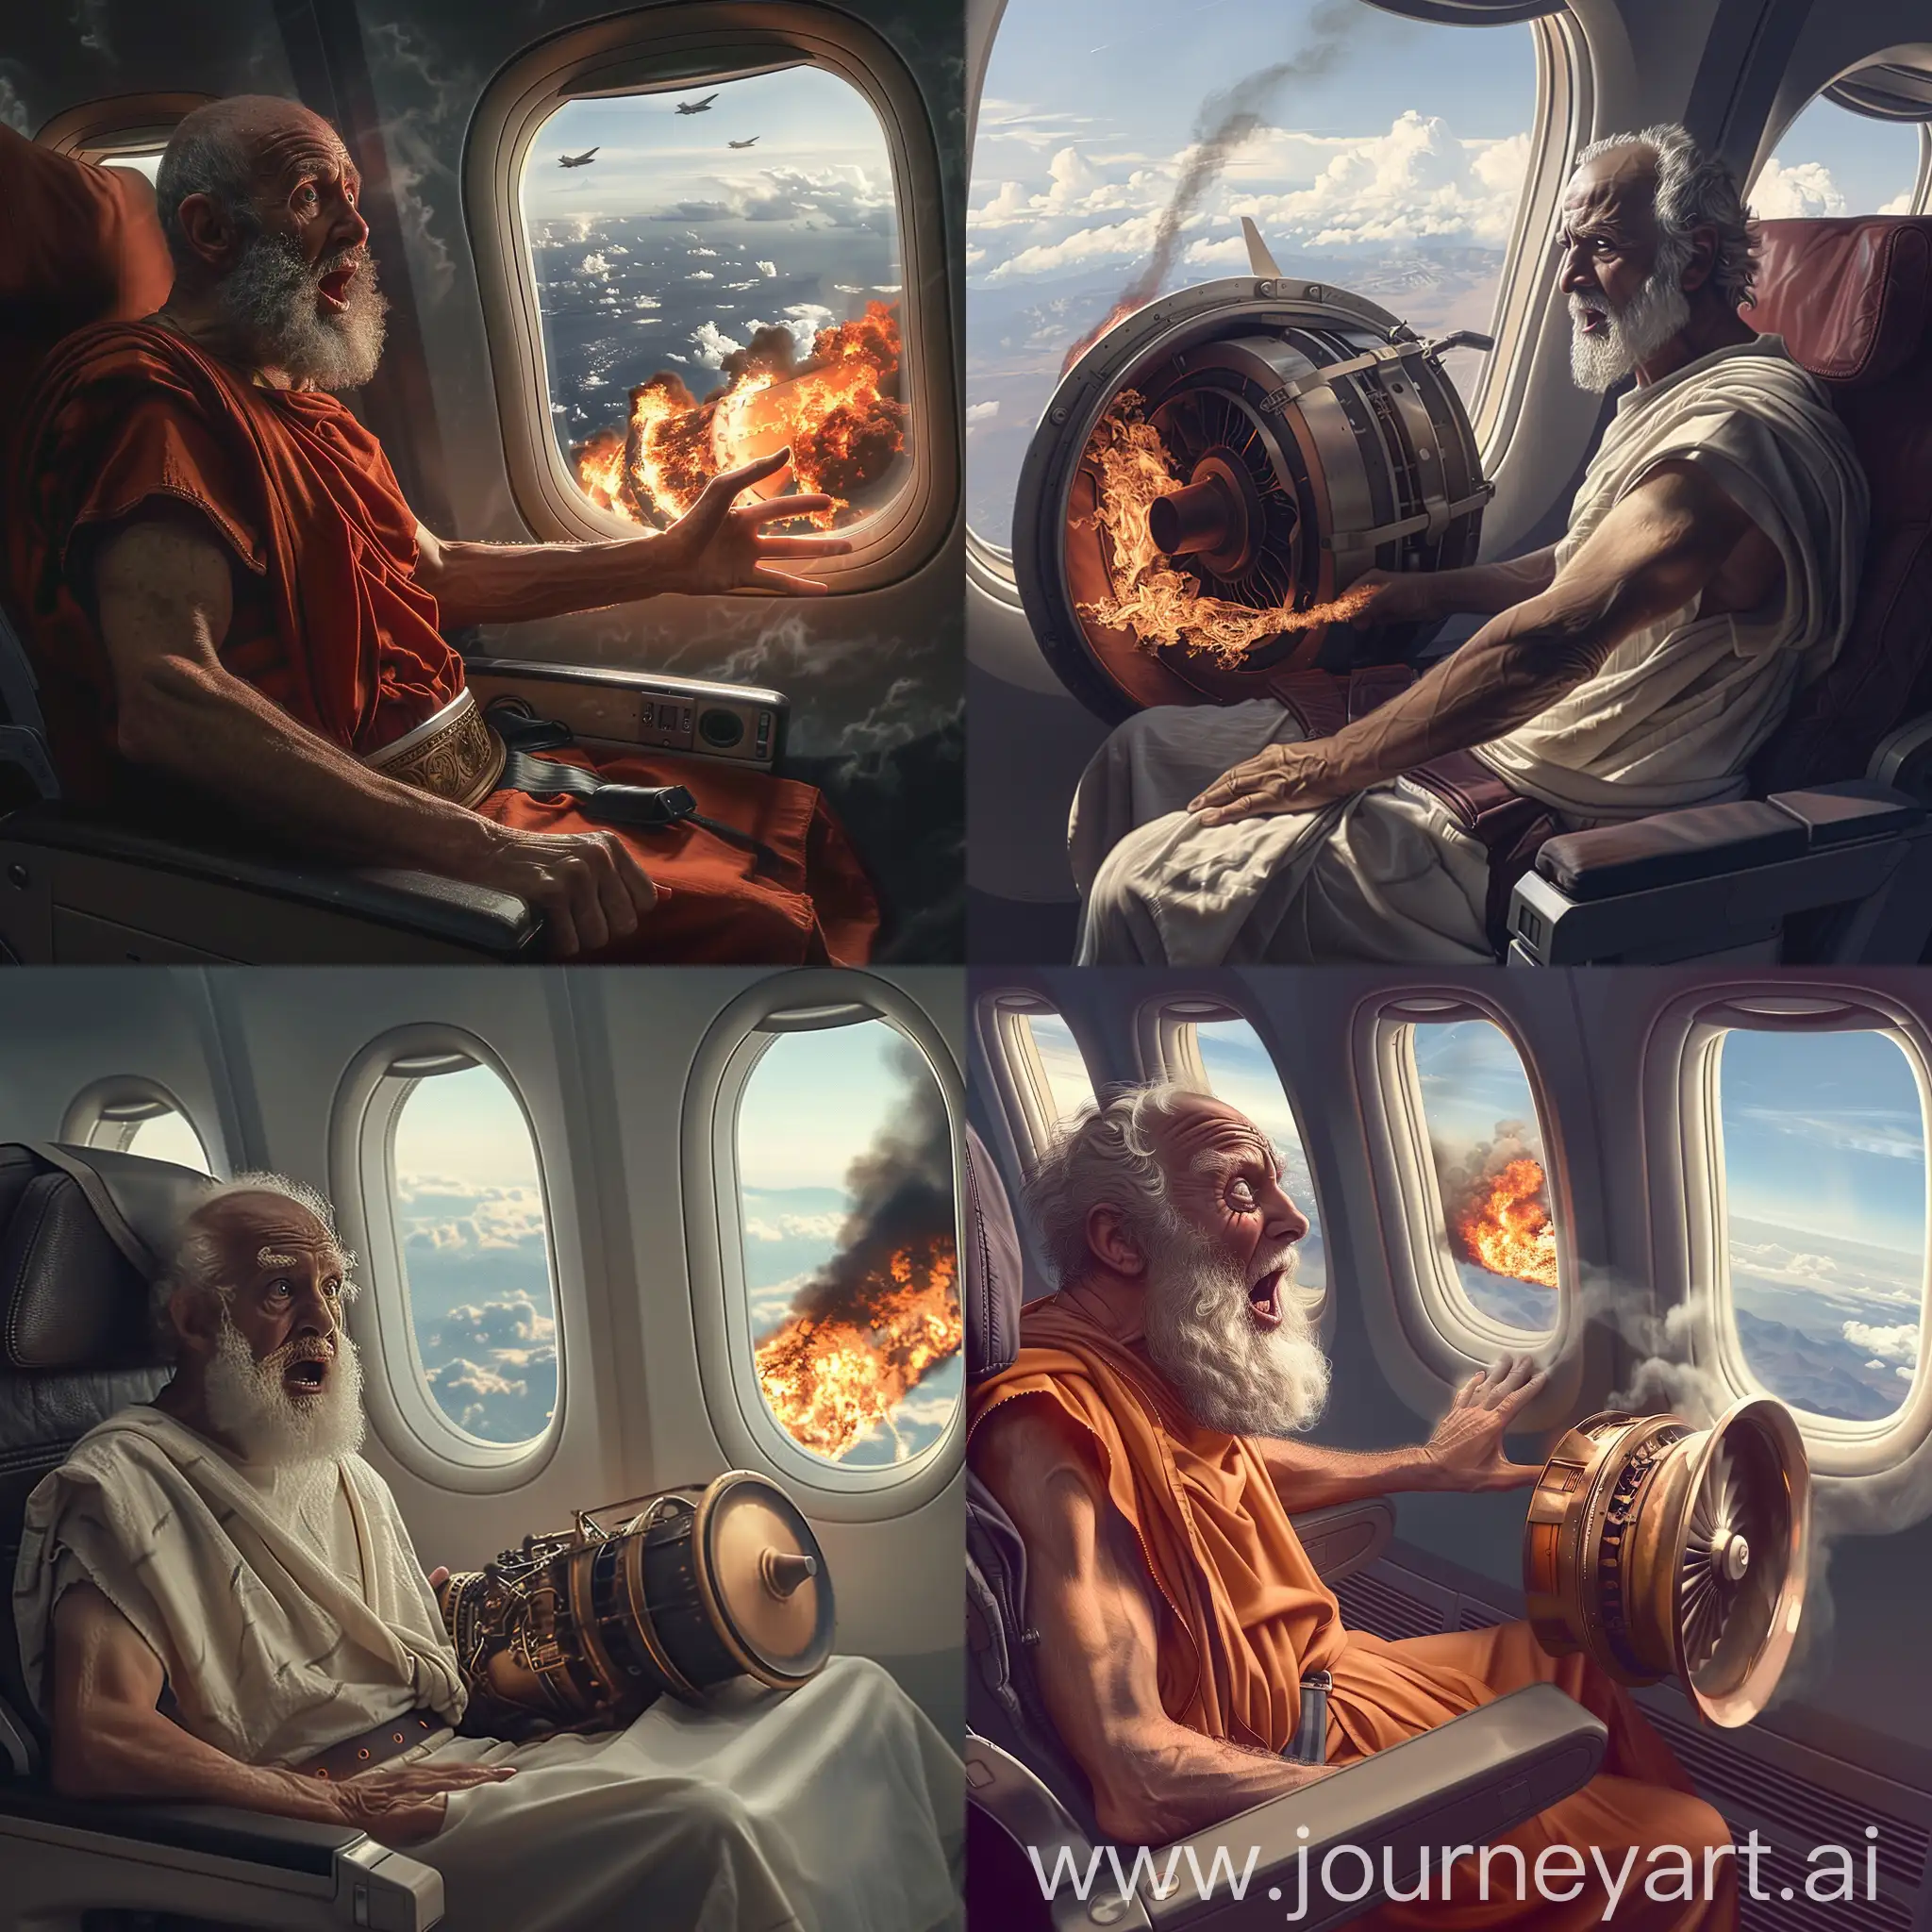 An ancient Greek philosopher is shocked, he is flying on an airplane, sitting in a seat, looking out the window, and there the engine of the plane is burning